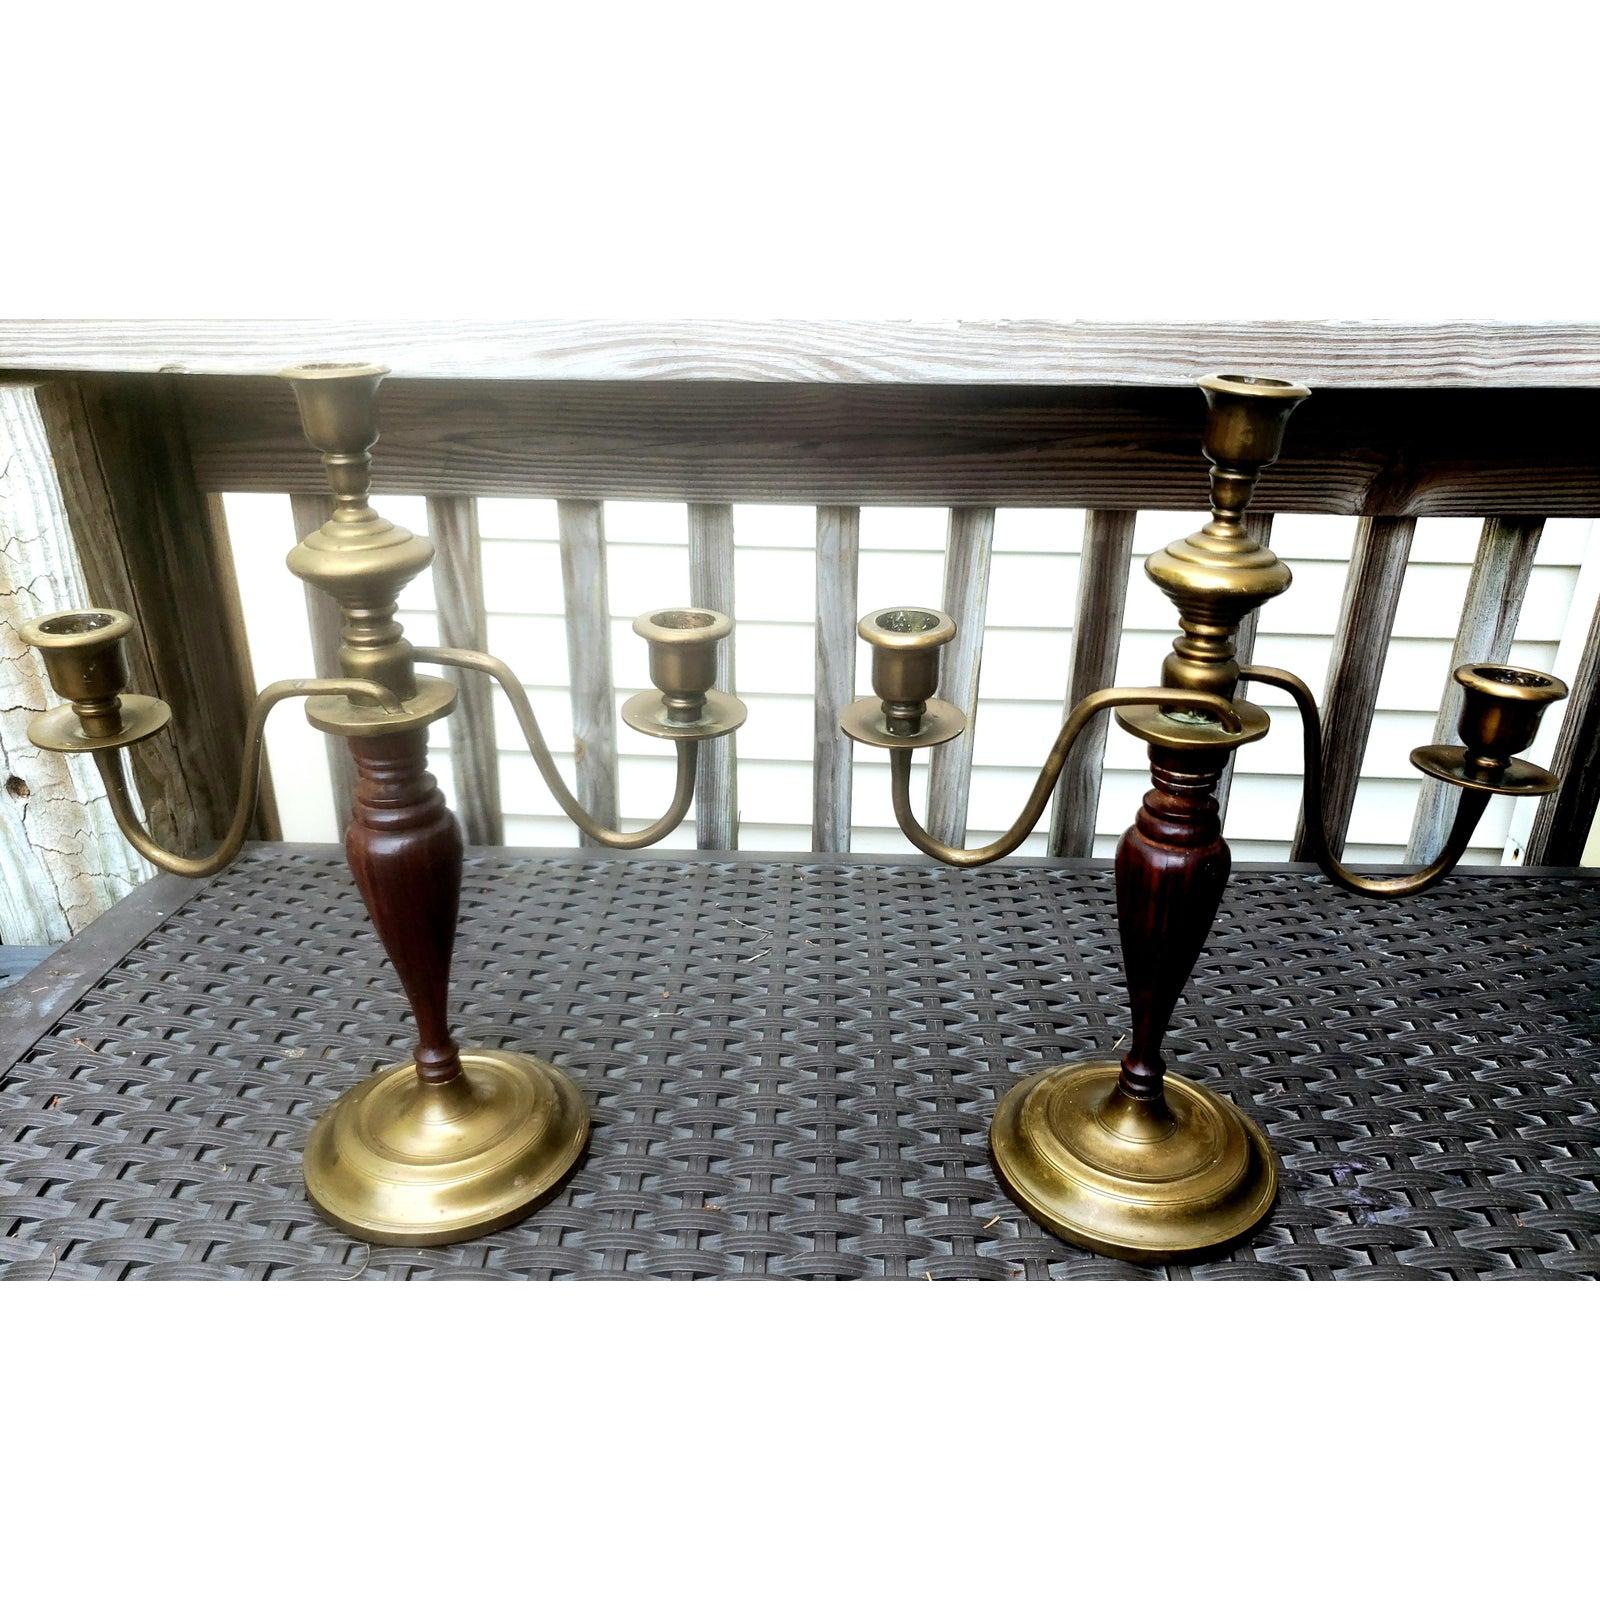 Pair of 19th century Solid Mahogany and brass candelabras, Candlesticks, candle holders.
Excellent antique condition.
Measures 11.5